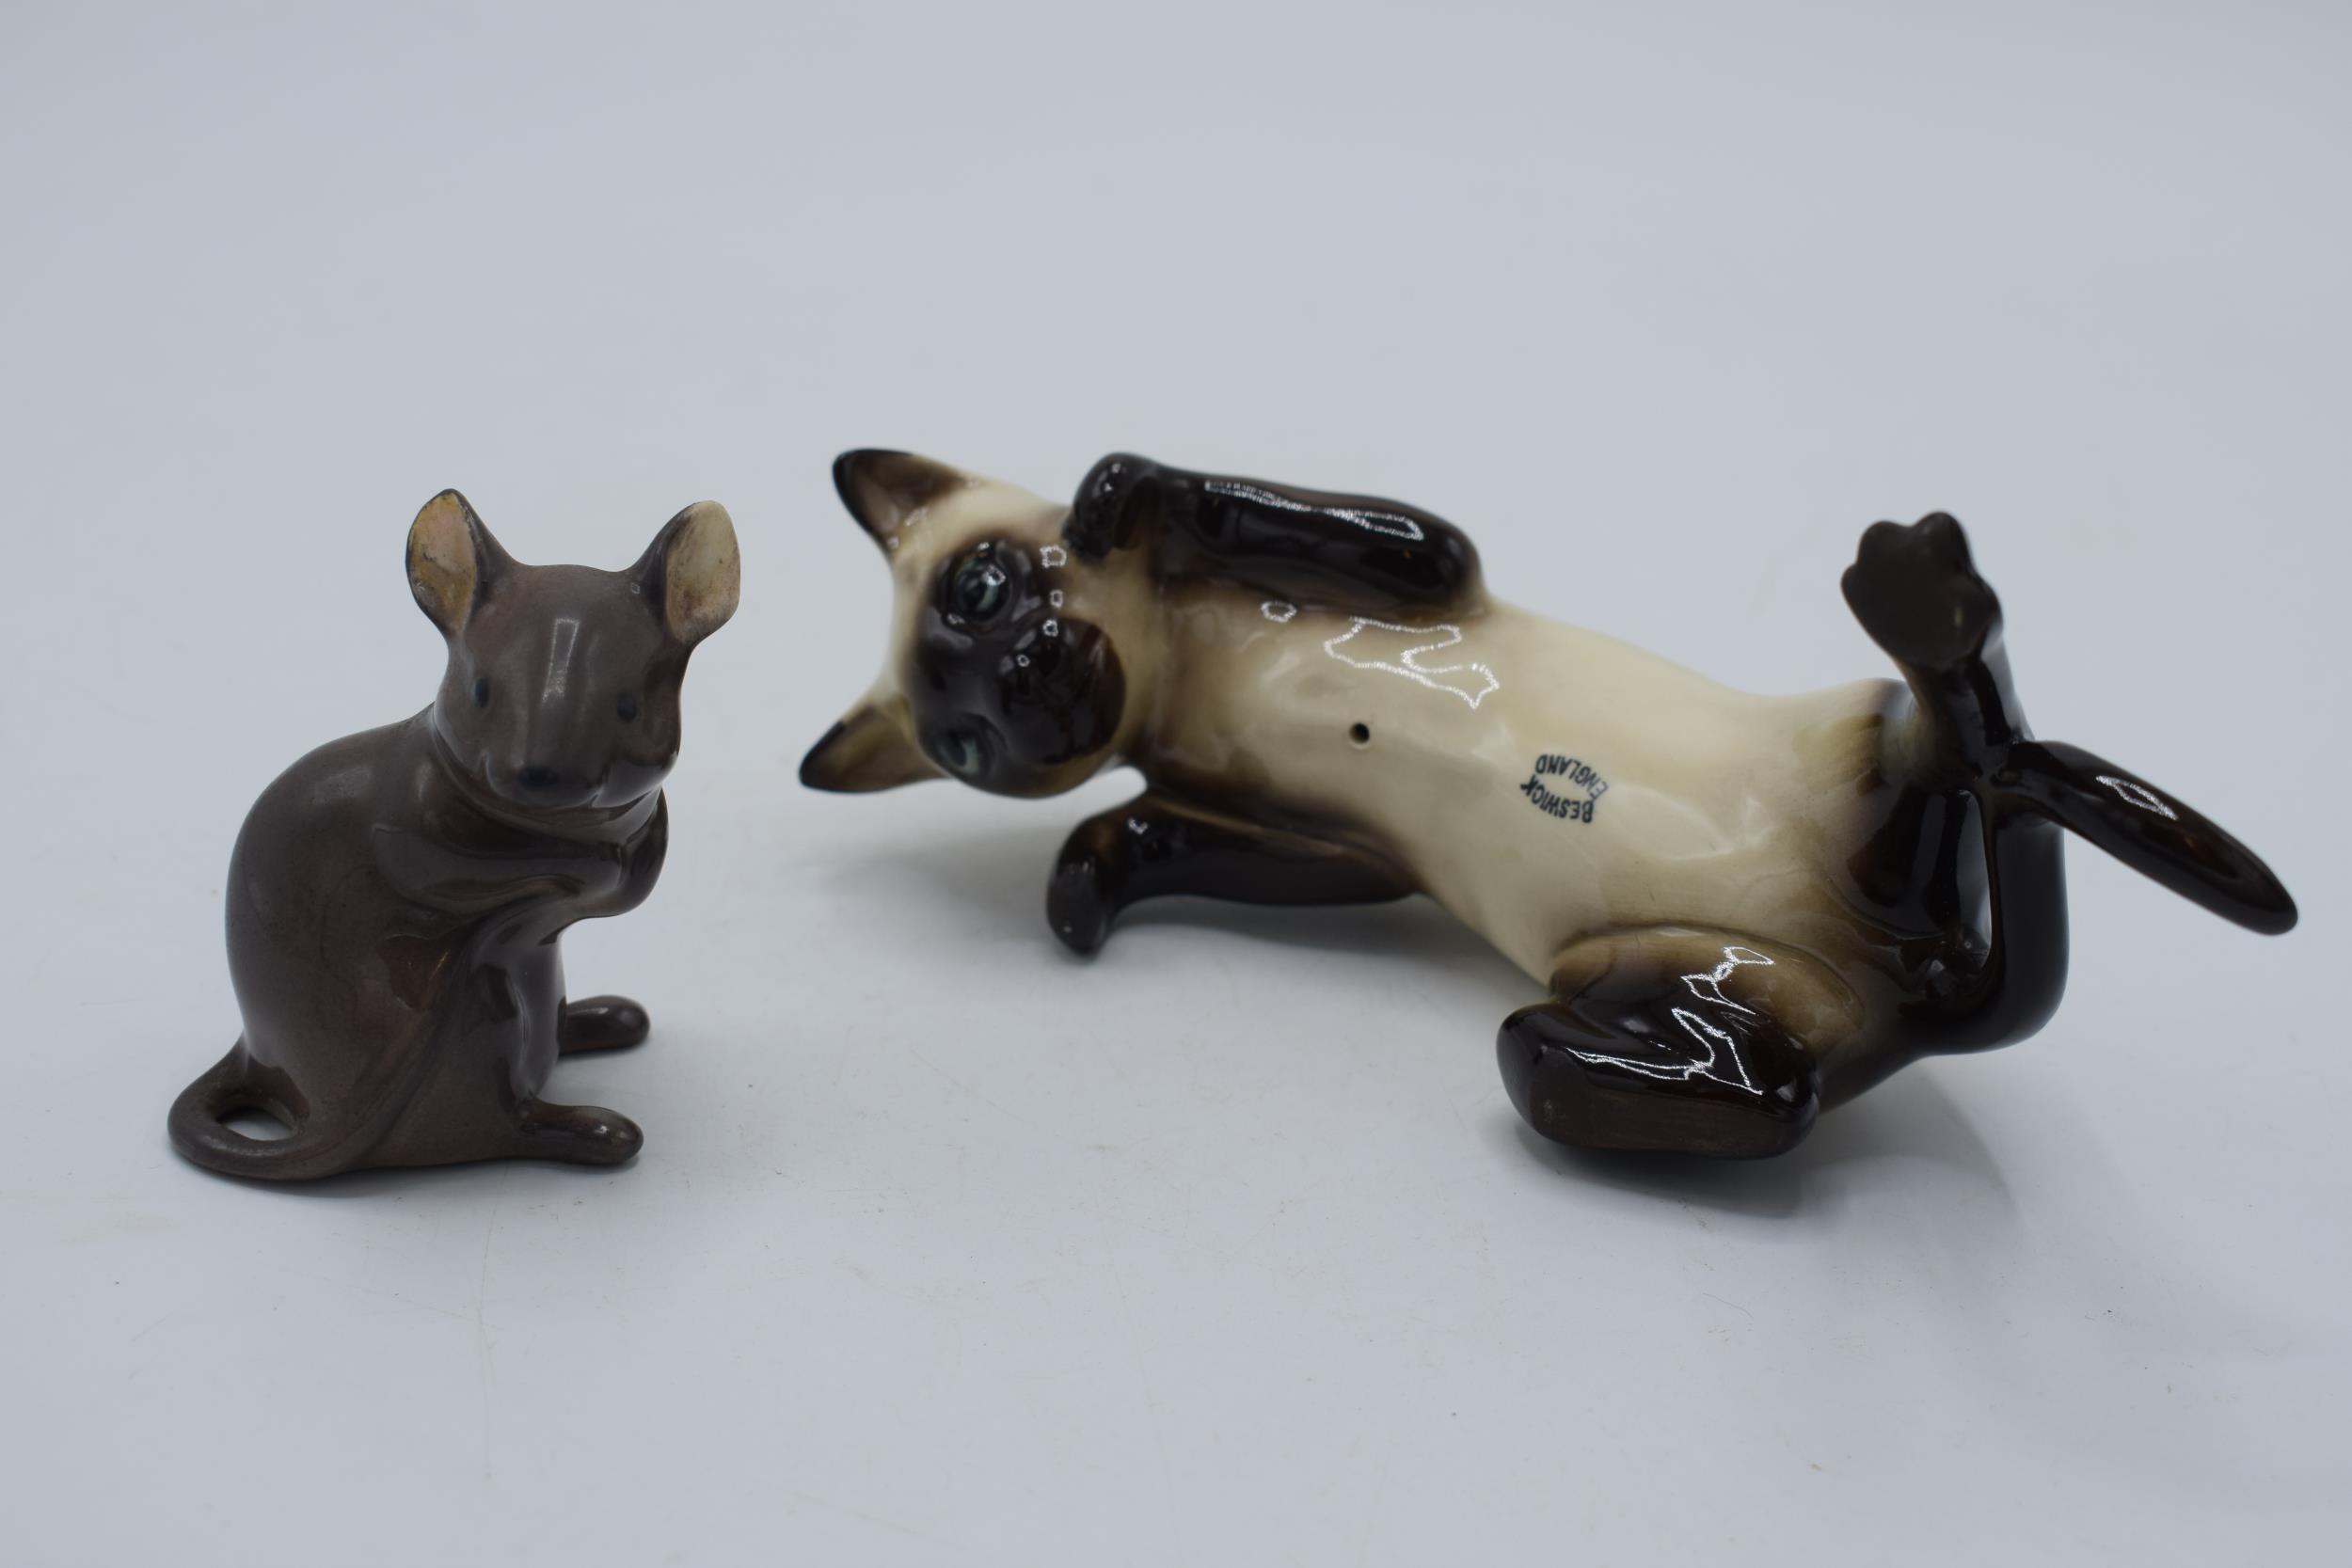 Beswick figures of a climbing cat and a mouse (2). In good condition with no obvious damage or